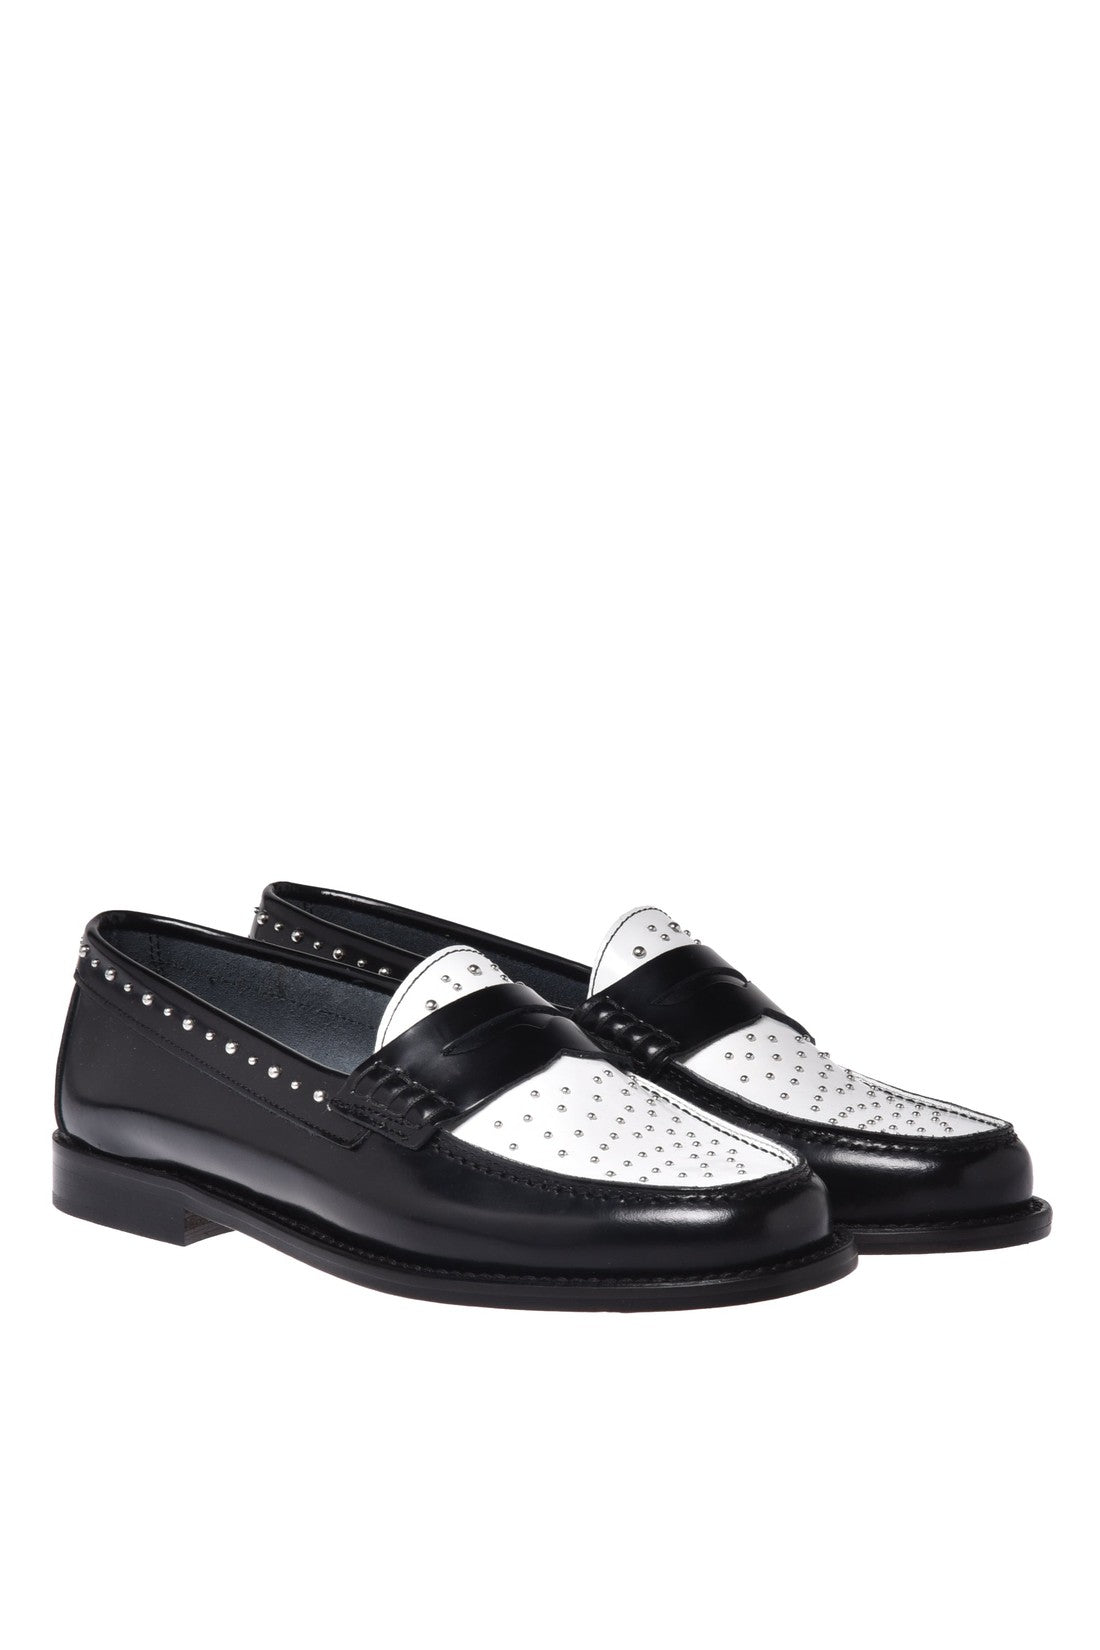 Loafer in black and white shiny calfskin